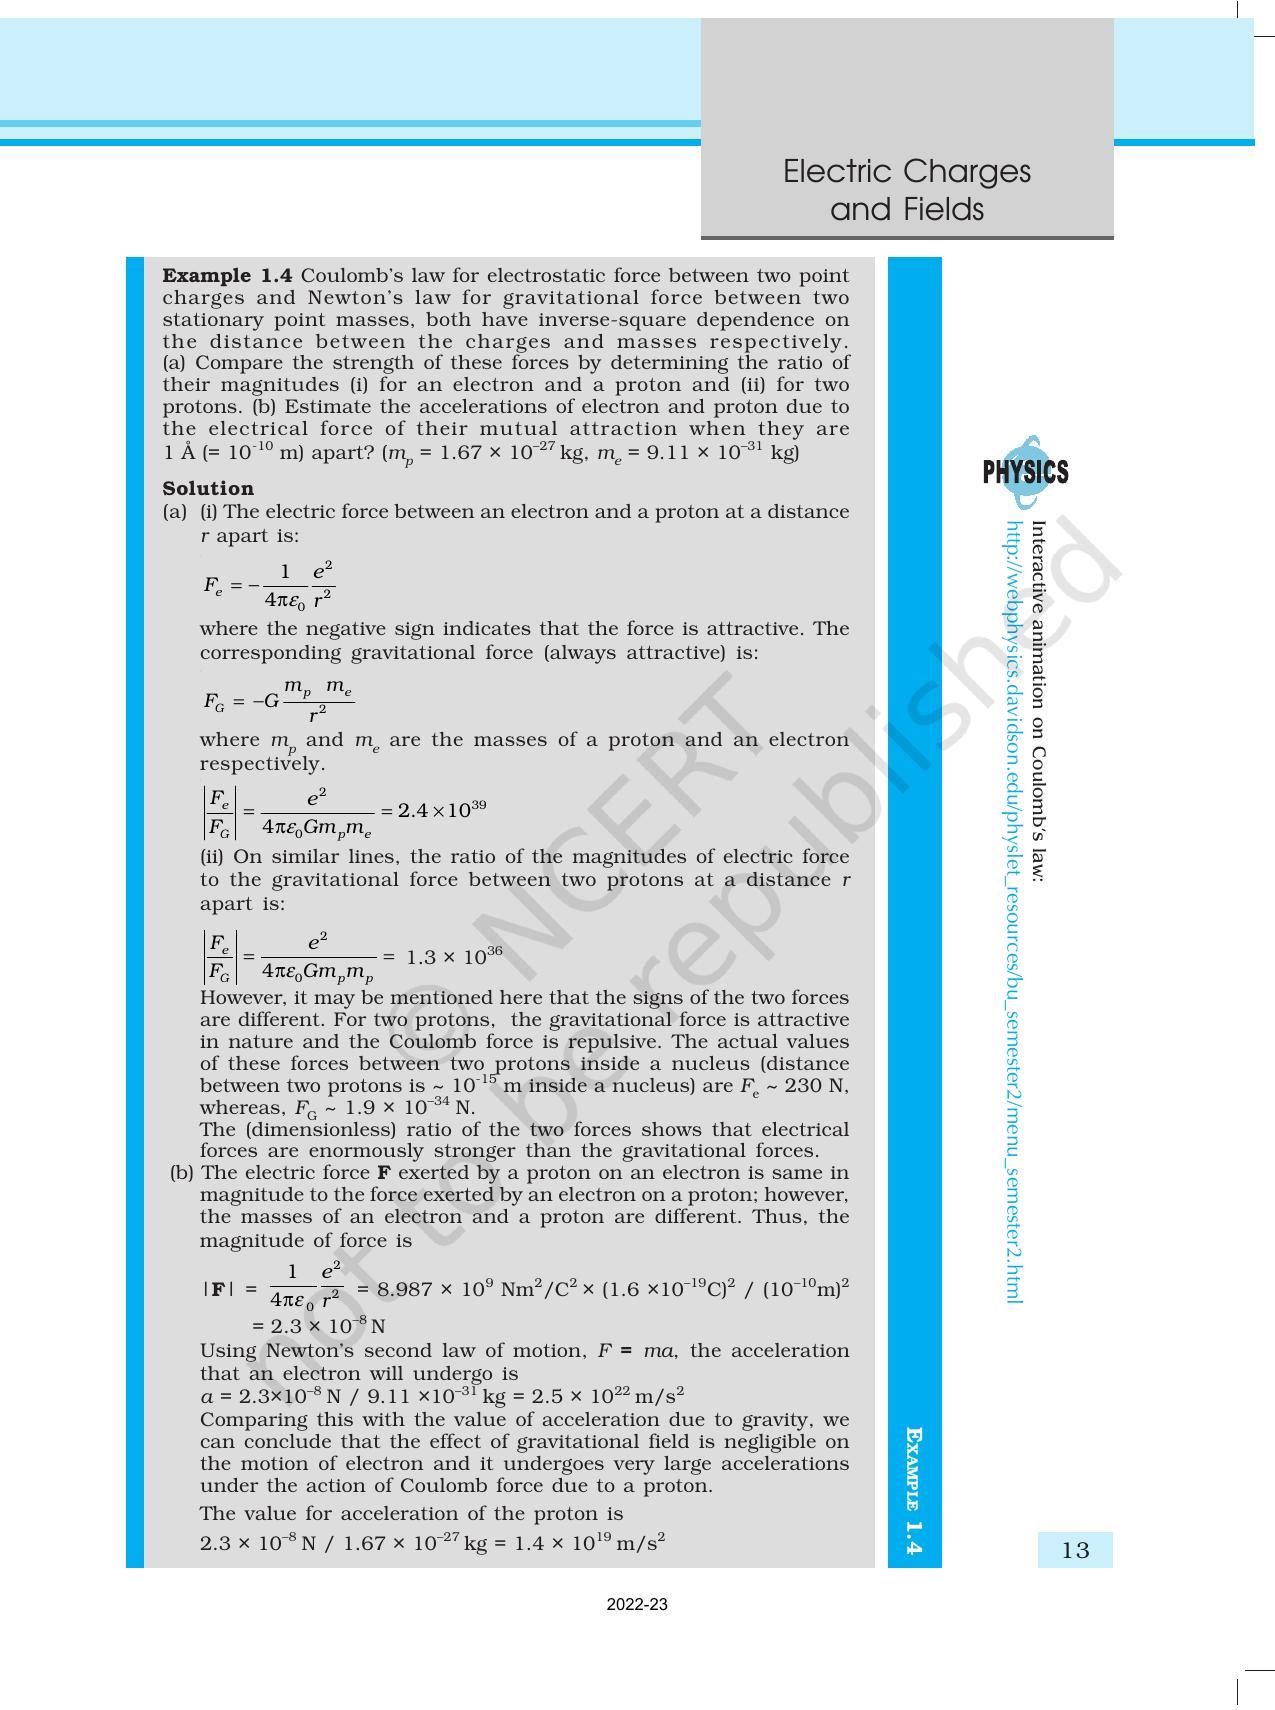 NCERT Book for Class 12 Physics Chapter 1 Electric Charges and Fields - Page 13